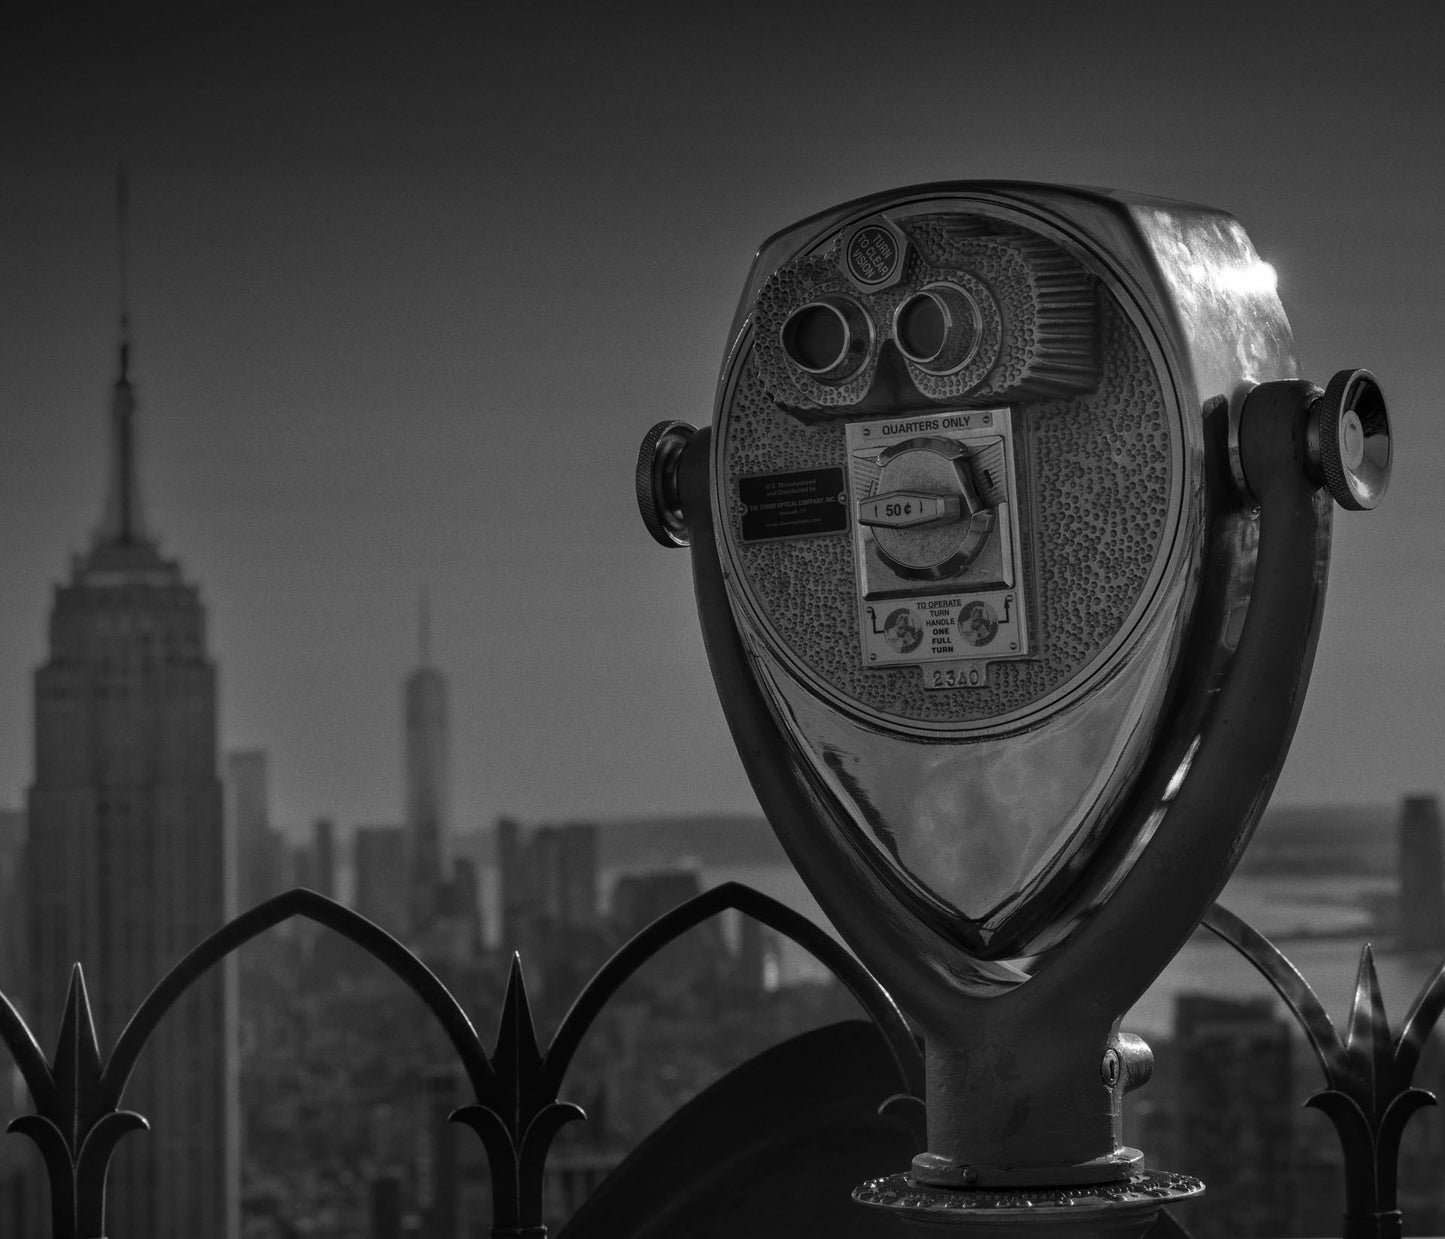 Coin Operated Binoculars With Empire State Building